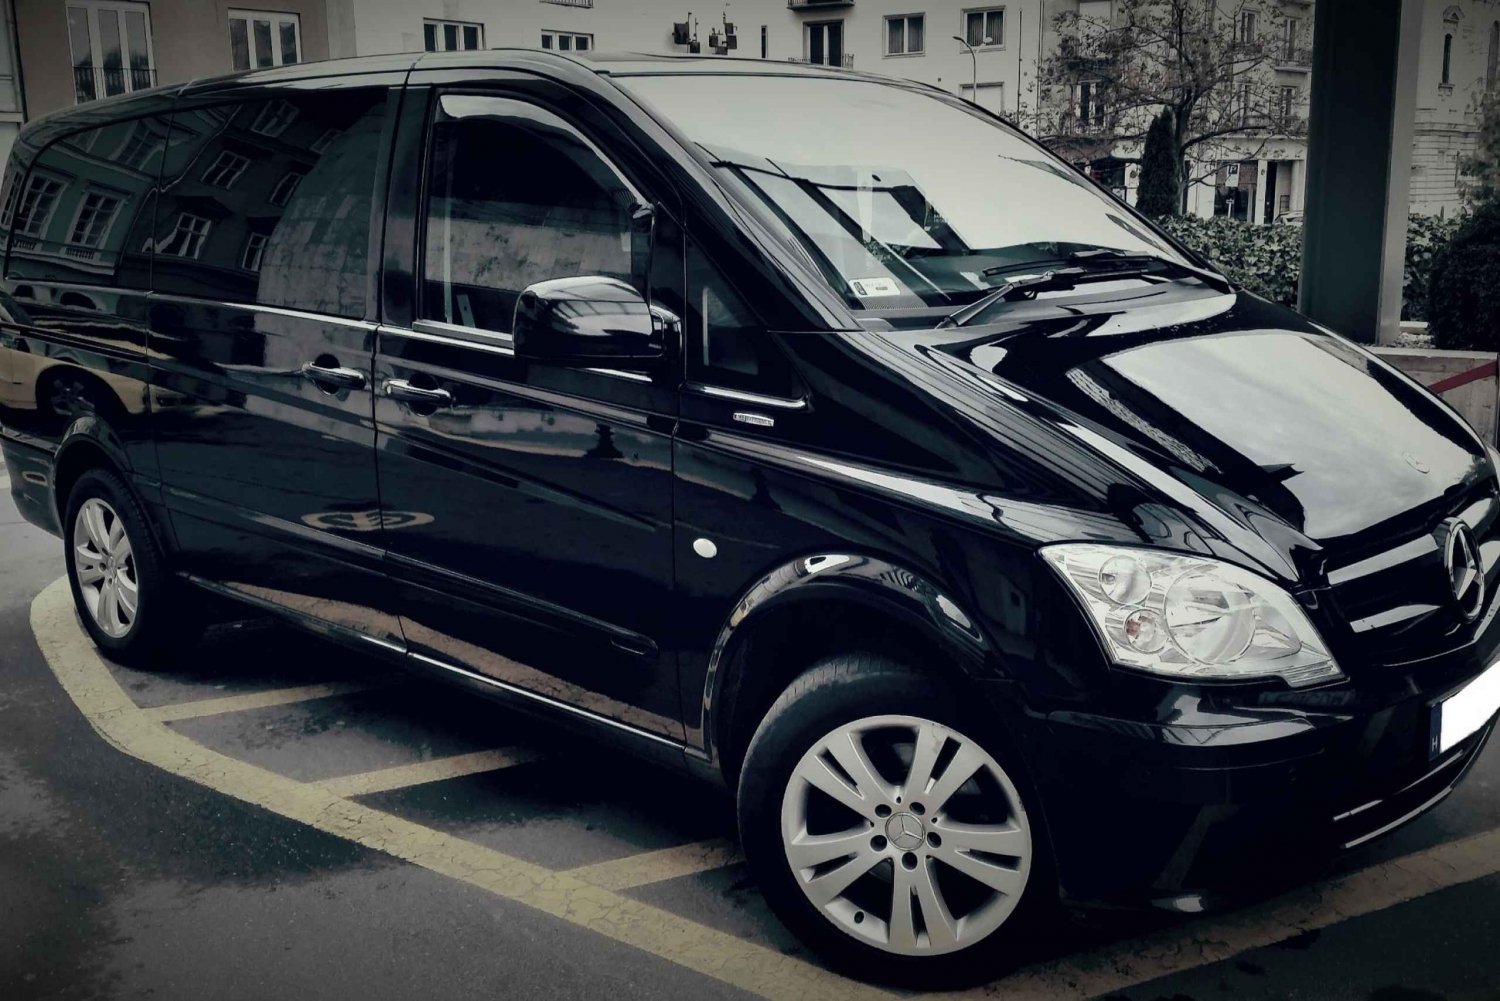 Budapest-Vienna Private Transfer by Luxury Vehicle